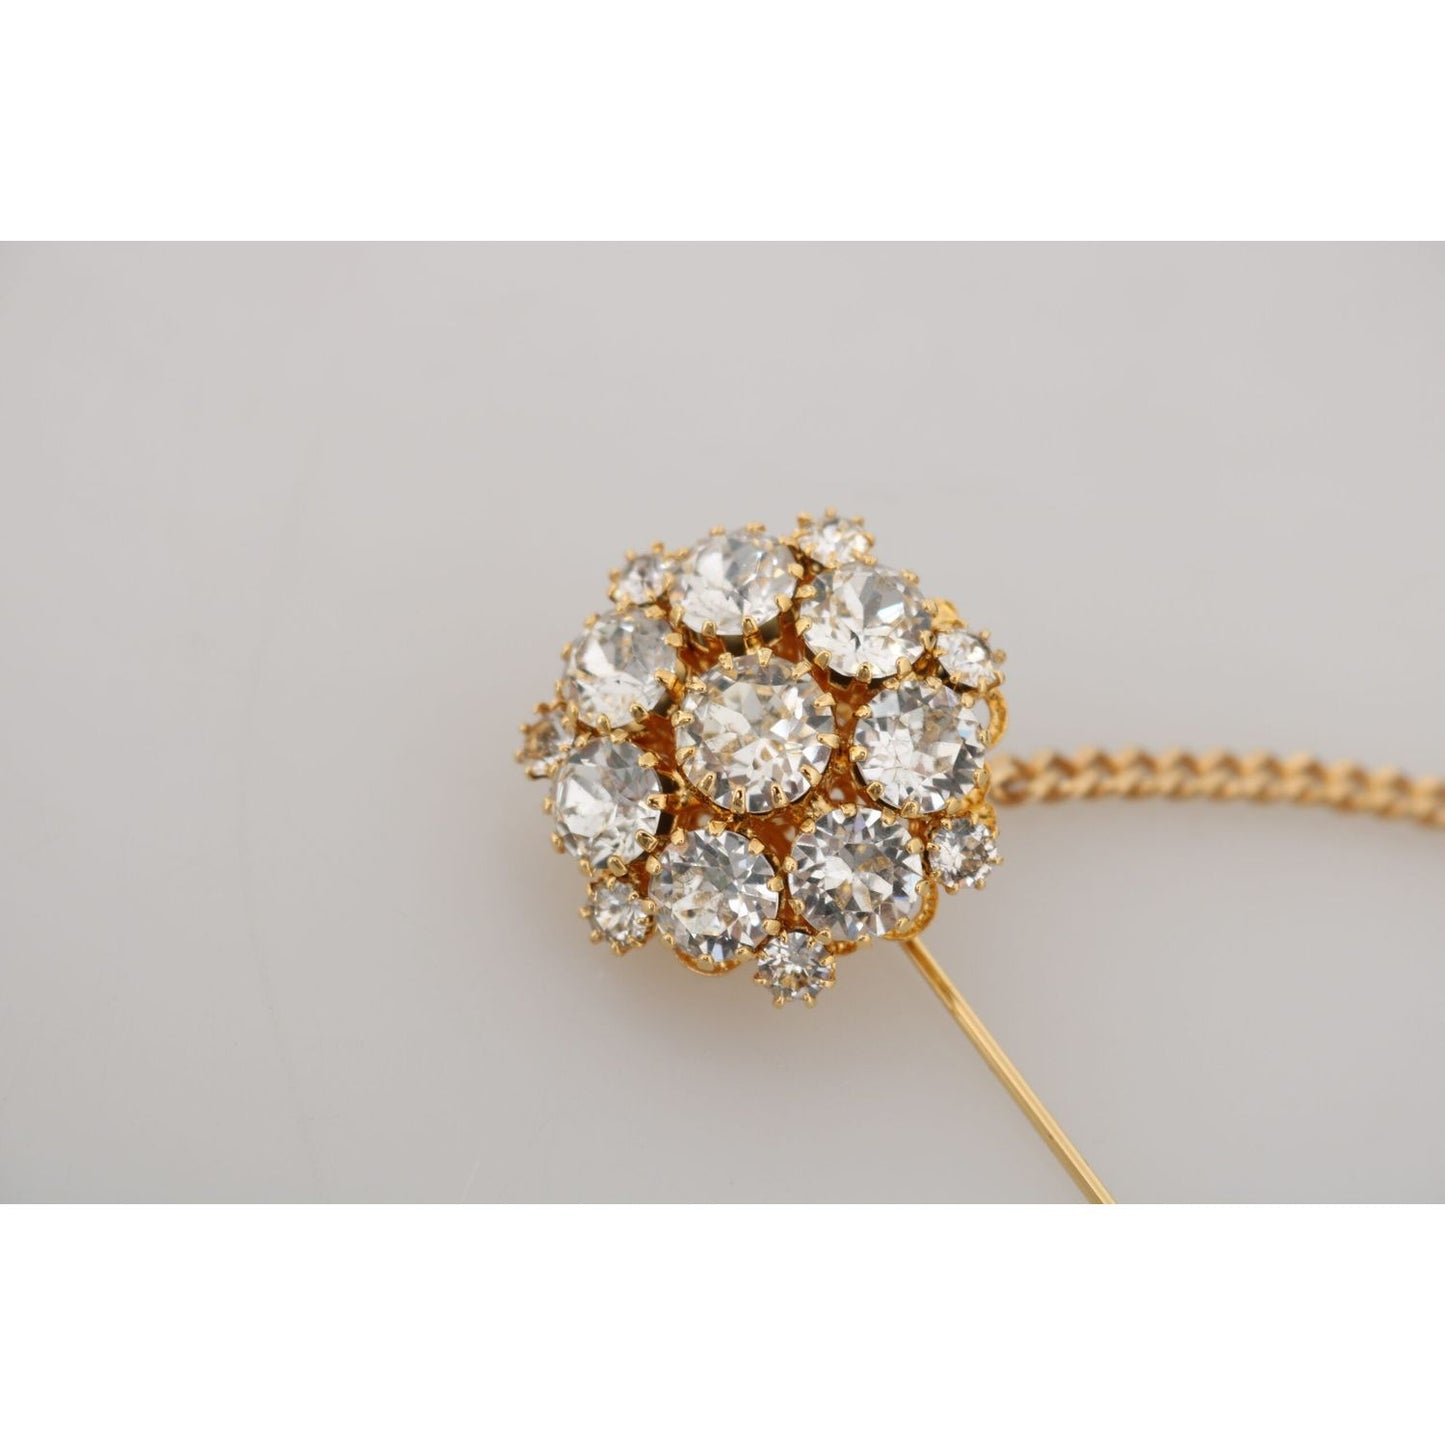 Dolce & Gabbana Exquisite Crystal-Embellished Gold Brooch gold-brass-clear-crystal-chain-pin-women-brooch